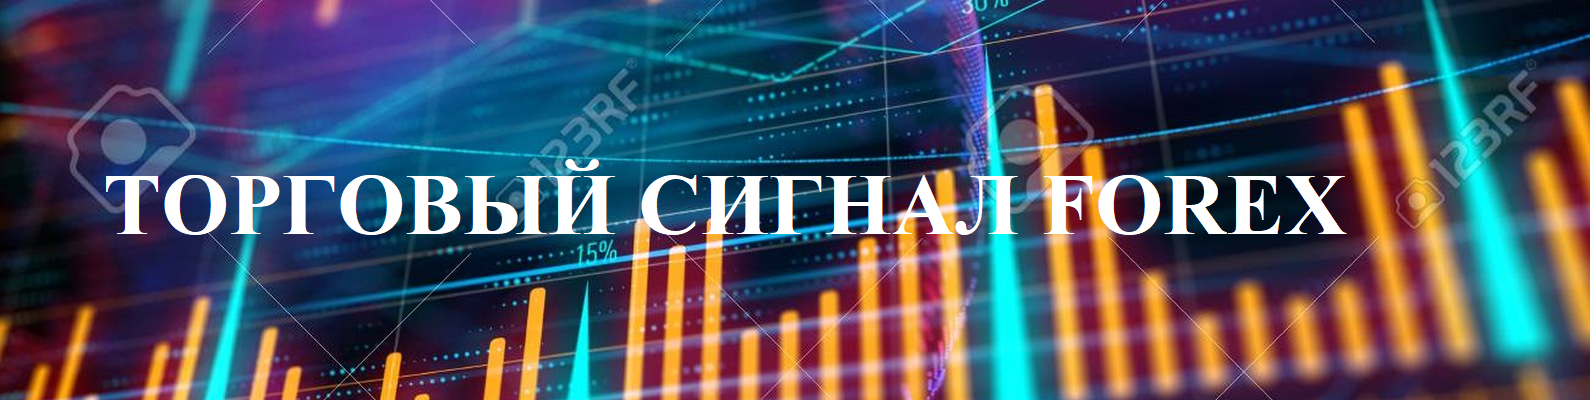 Read more about the article Торговый сигнал для FOREX